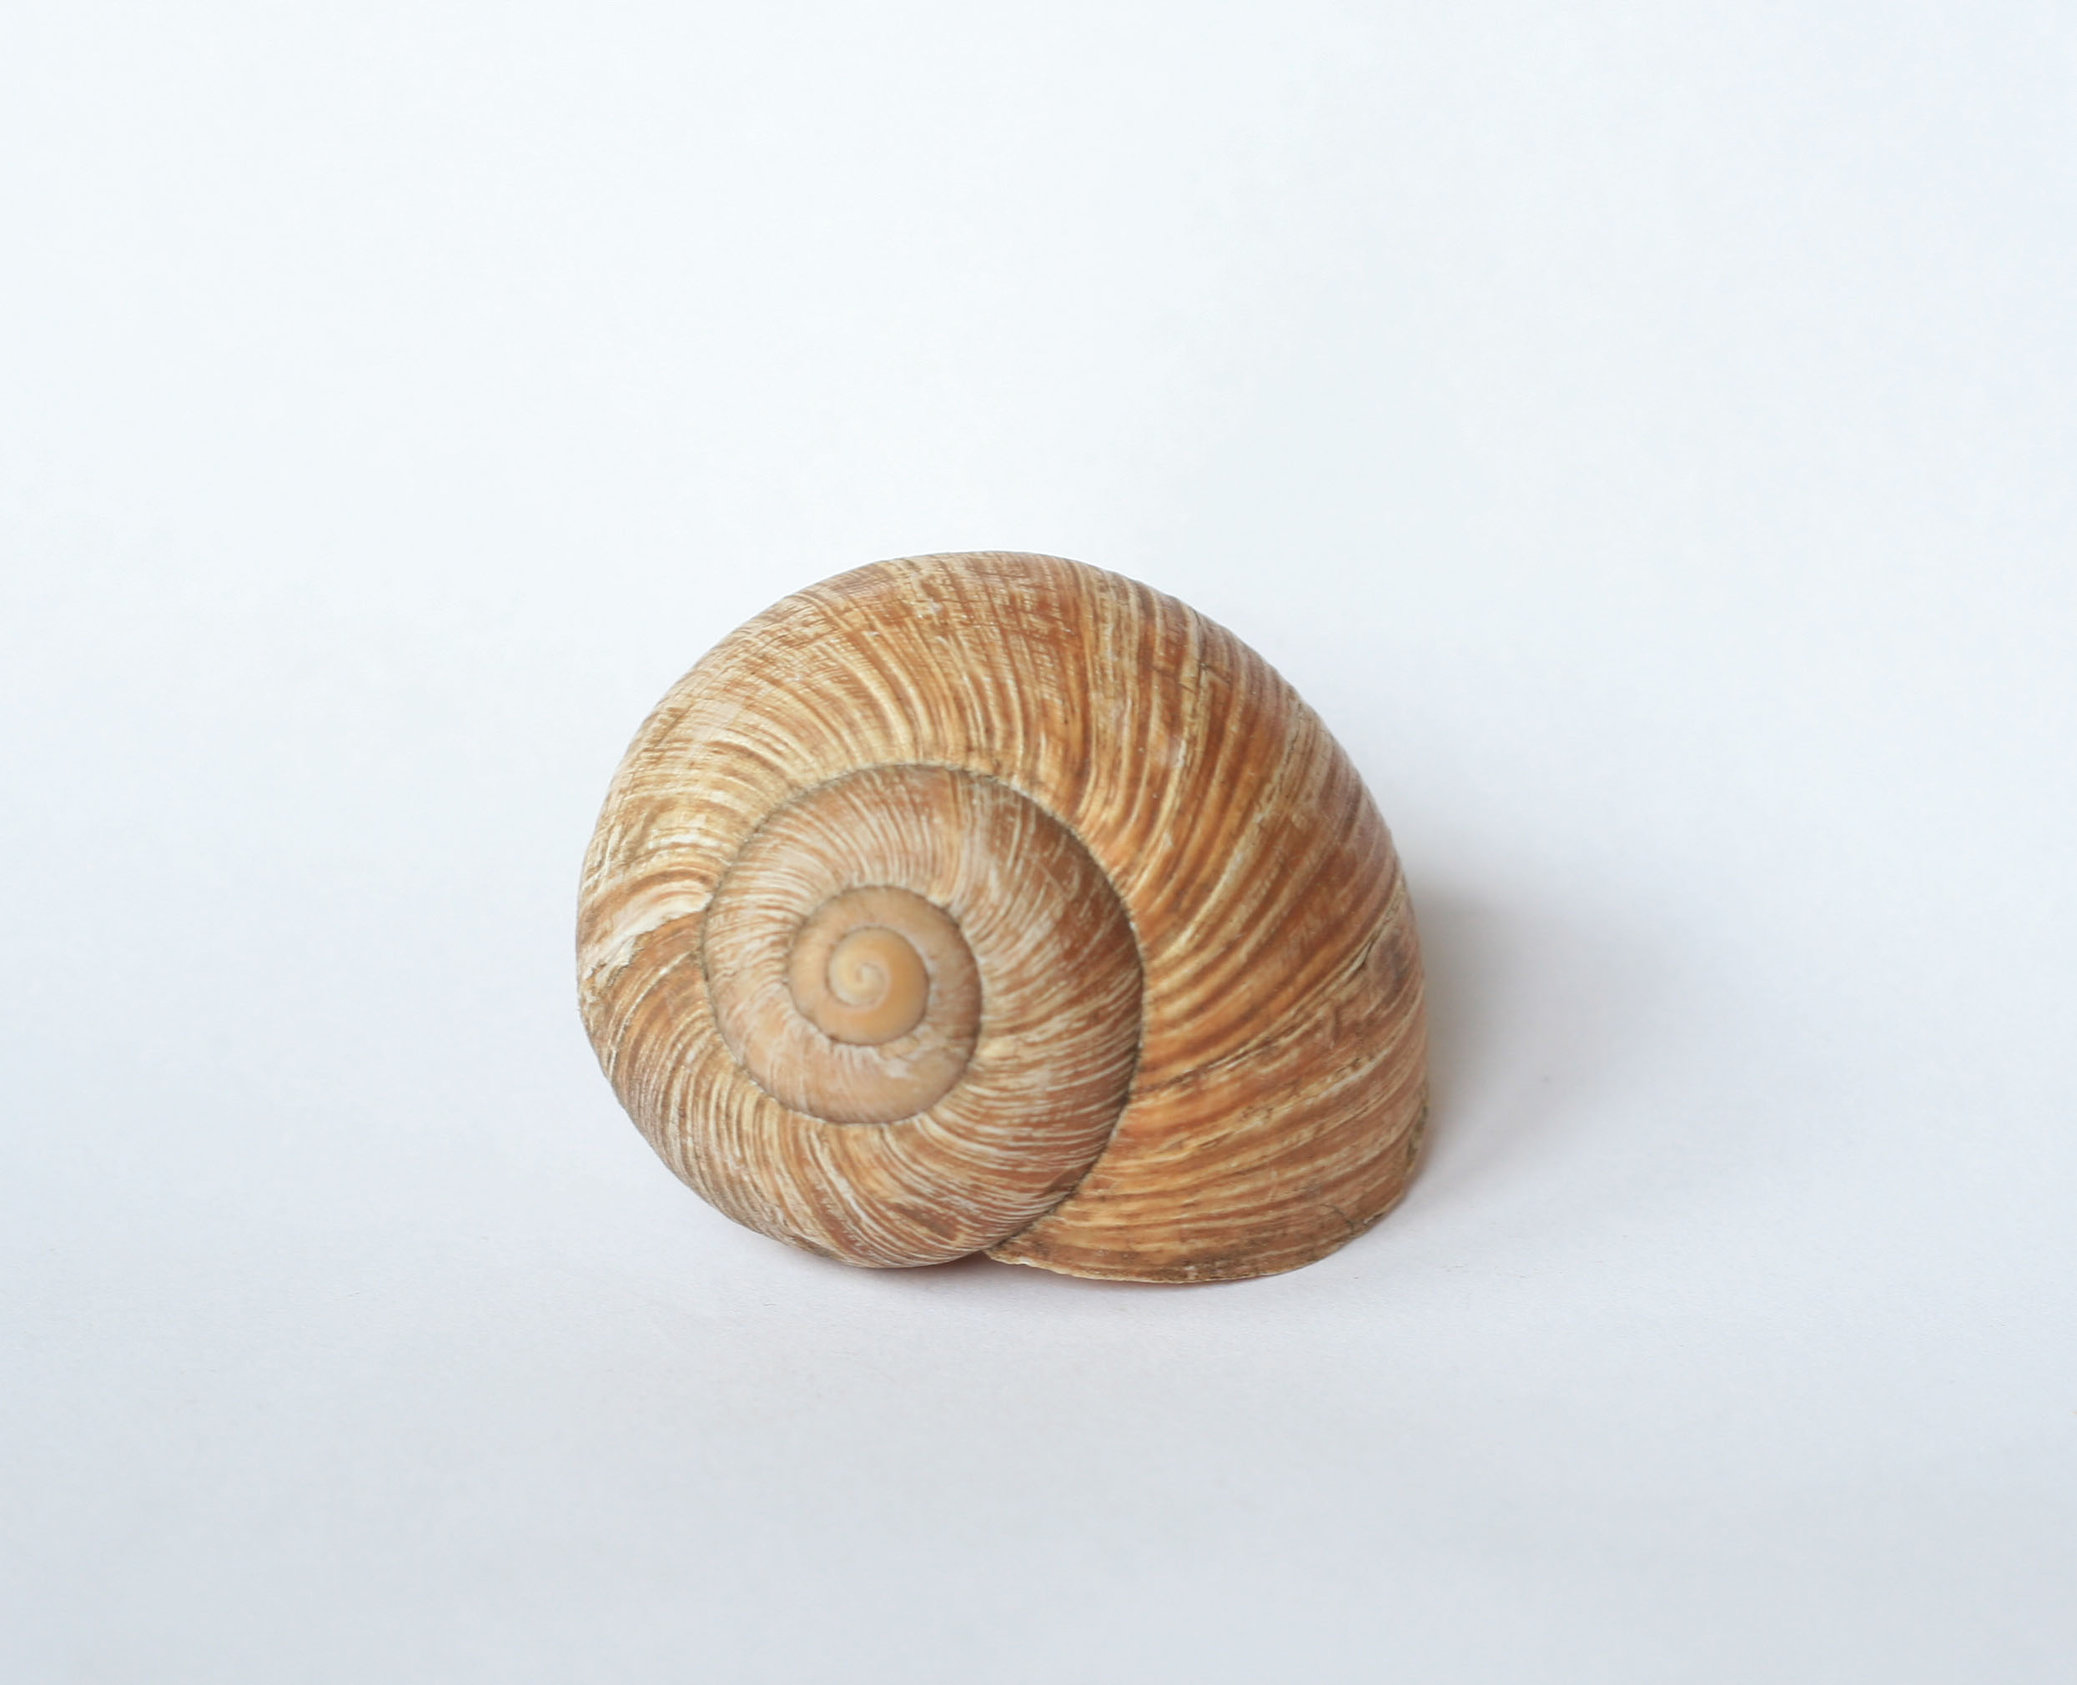 snail shell by doko-stock on DeviantArt